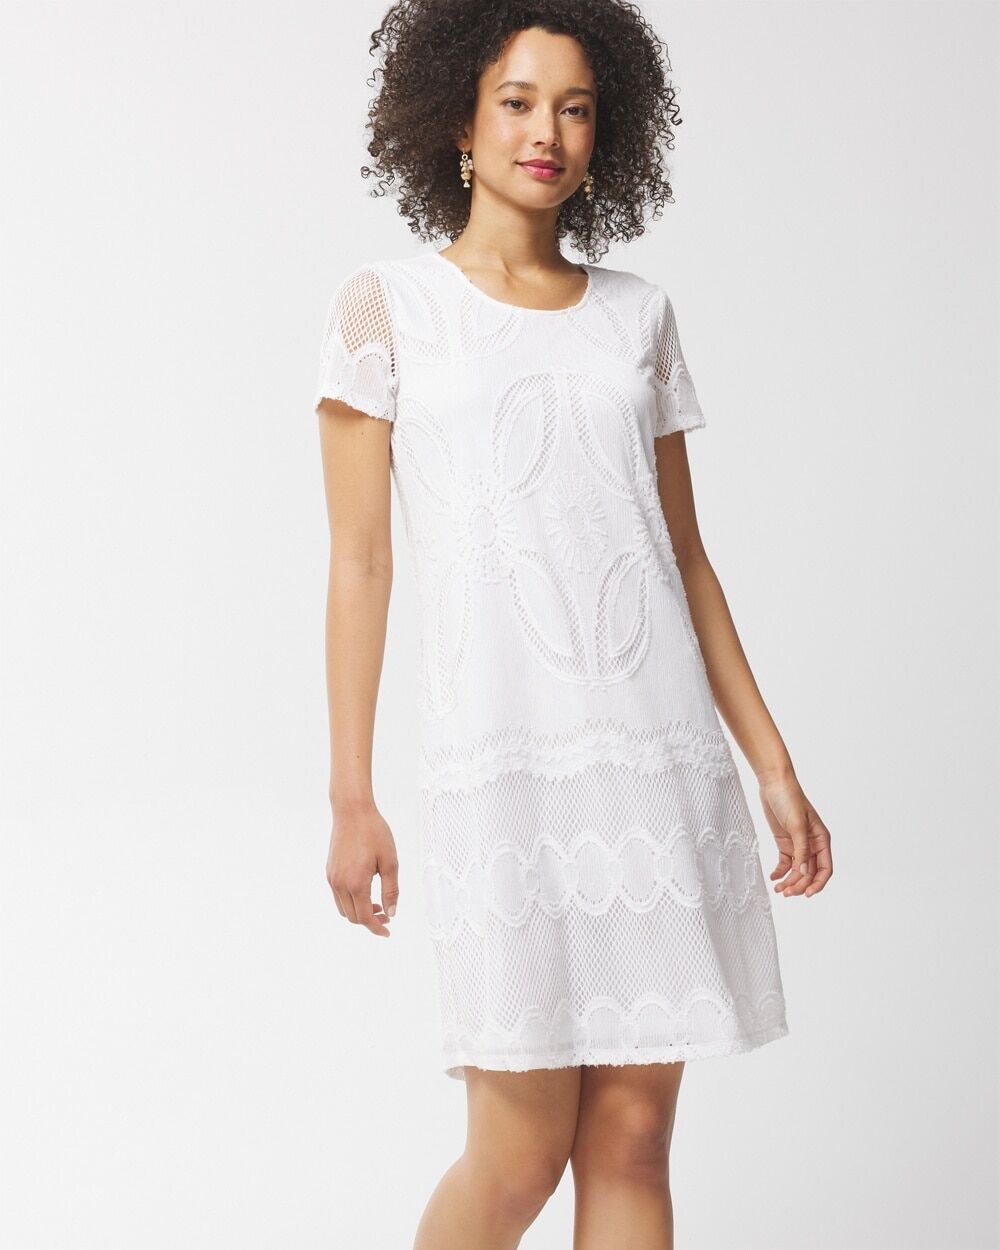 Chico's Off The Rack Women's Lace Knee-Length Dress in White Size 12/14   Chico's Outlet, Spring Dresses - White - Women - Size: 12/14